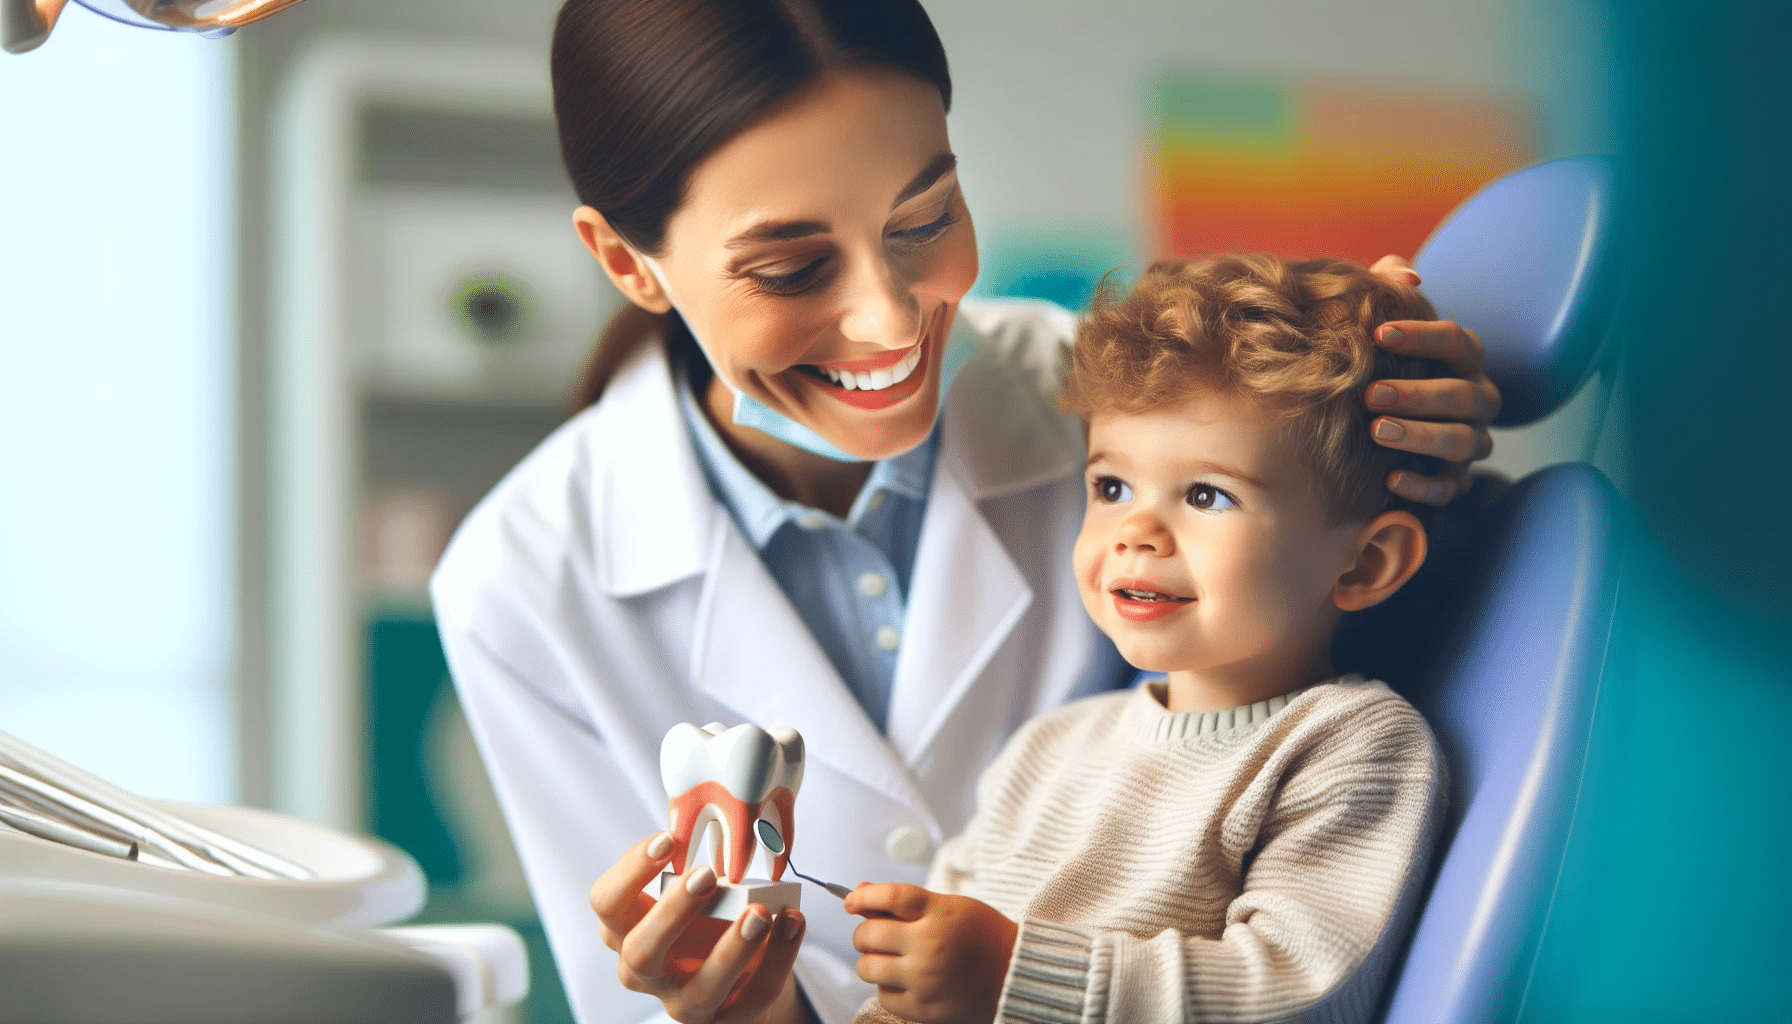 Illustration Of A Pediatric Dentist With A Child